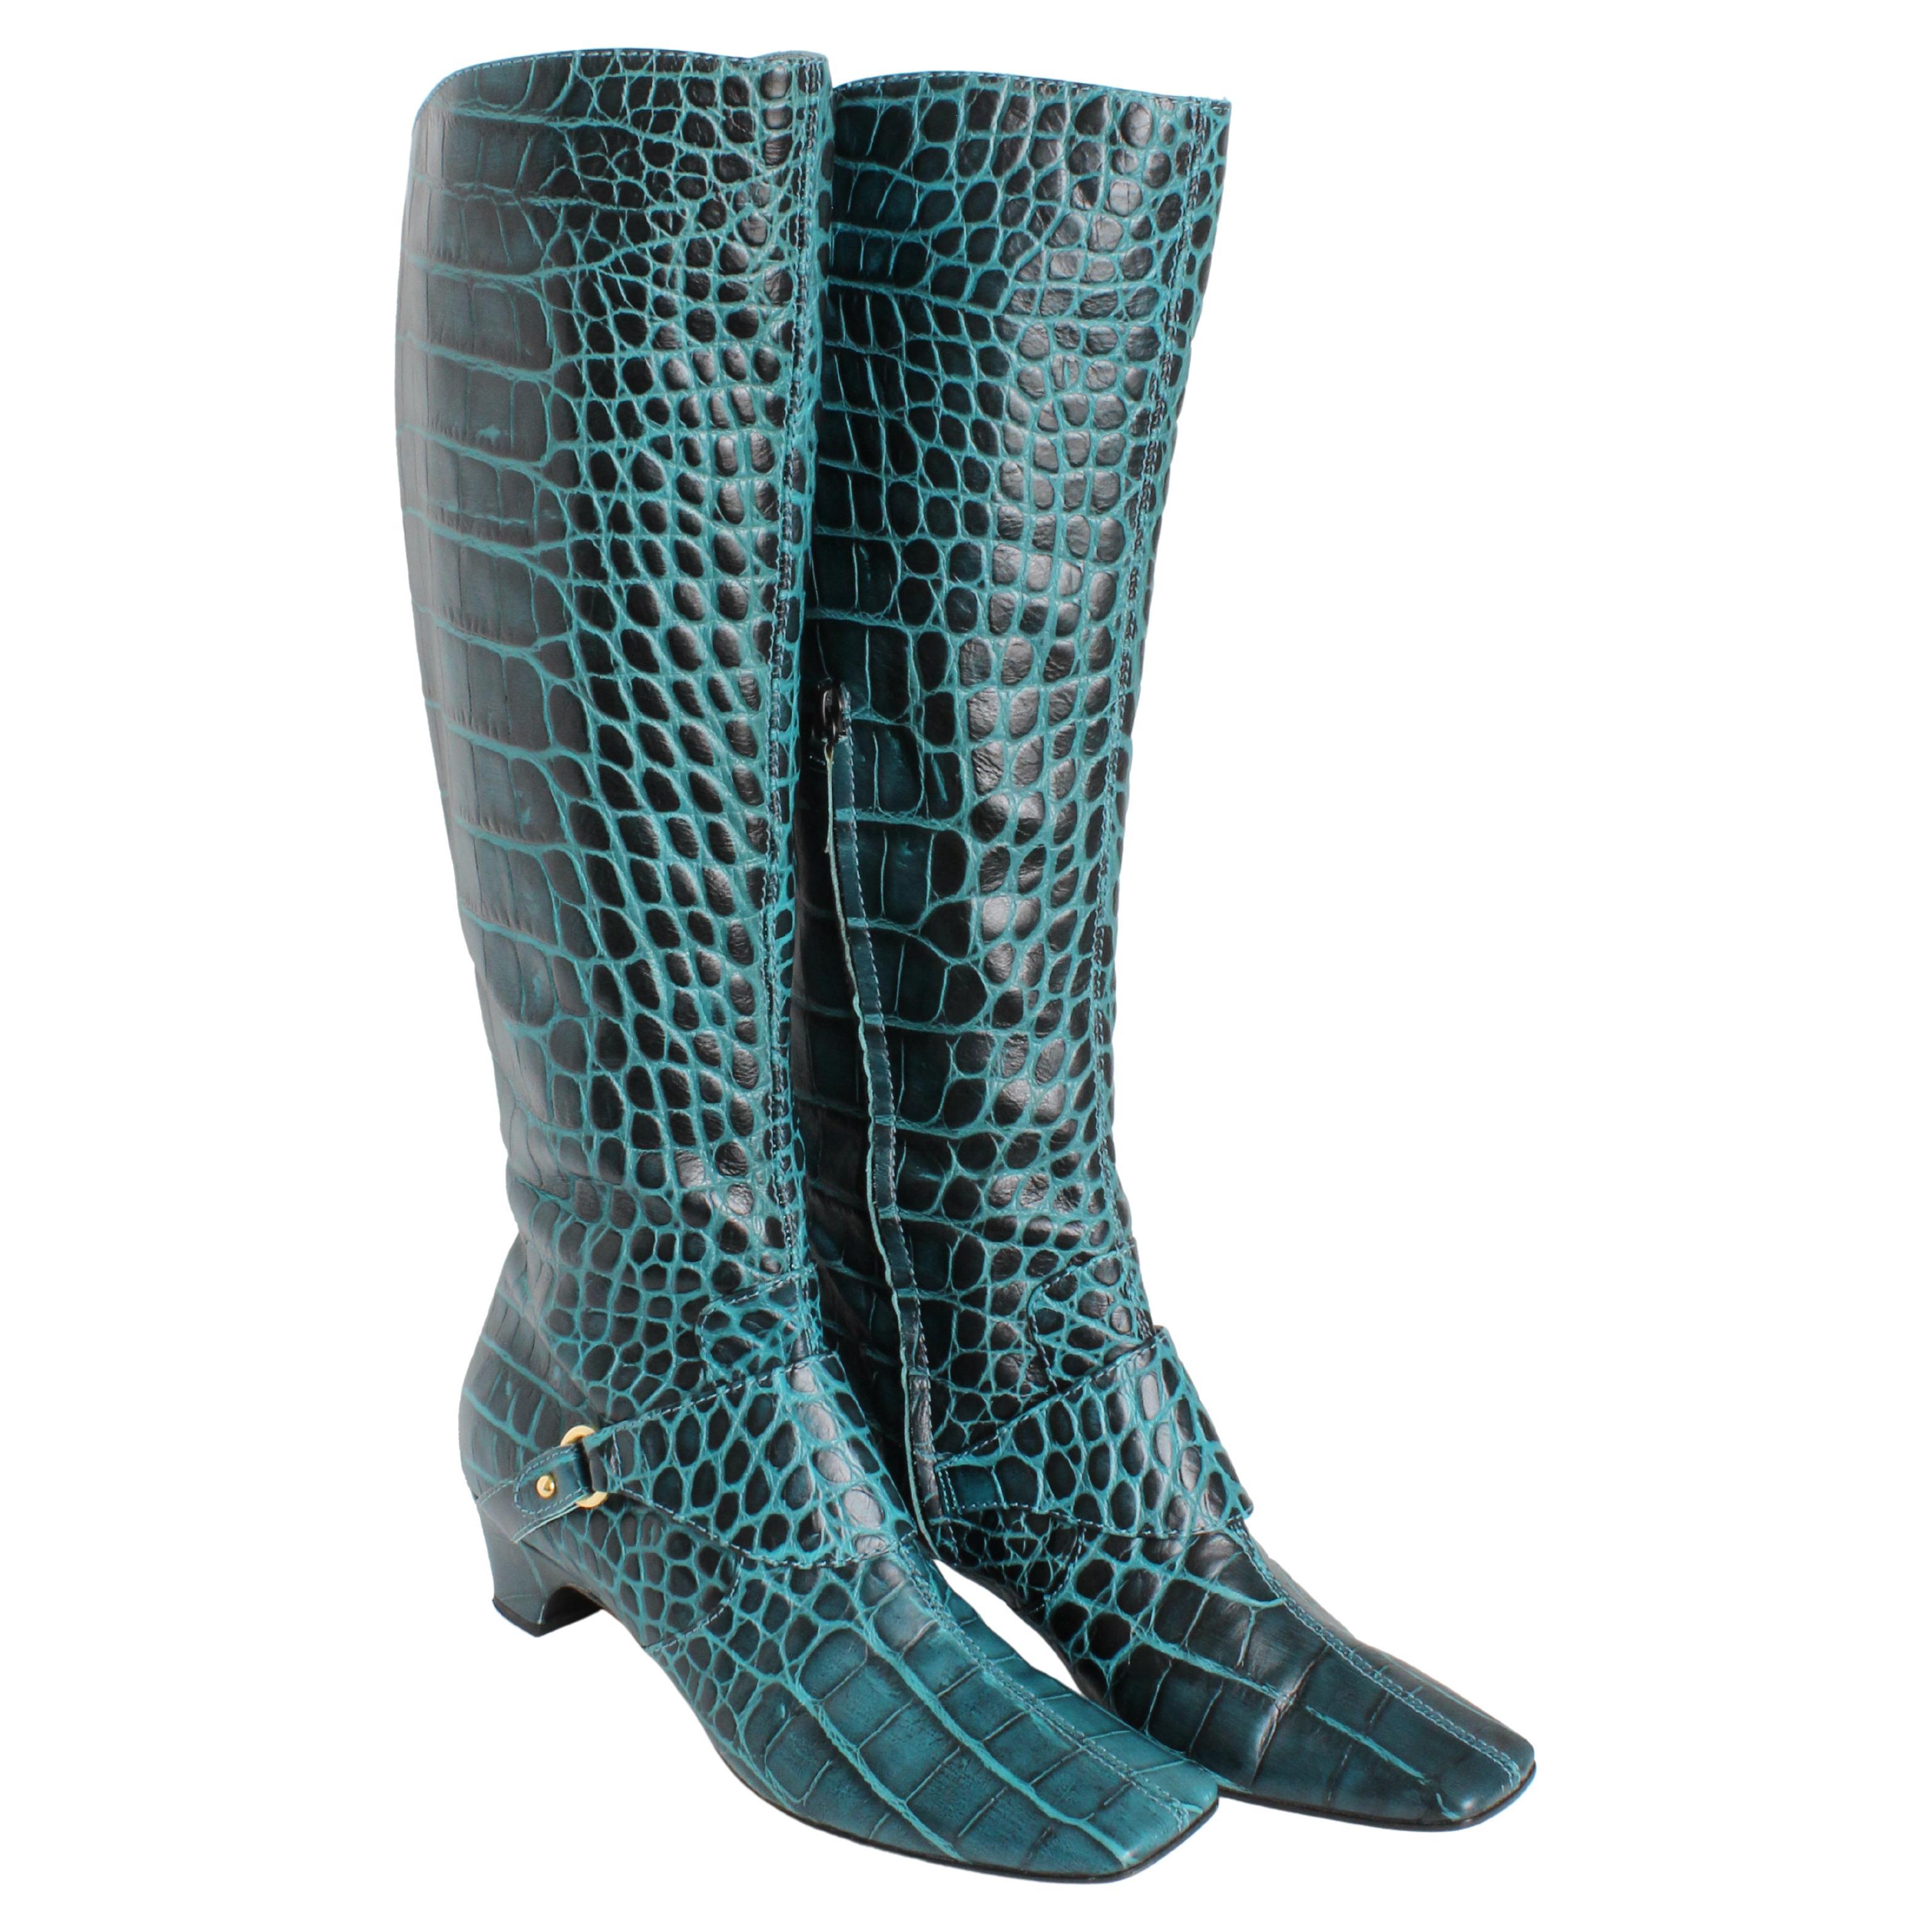 Casadei Boots Croc Embossed Leather Green Blue Made in Italy Vintage Size 9.5 